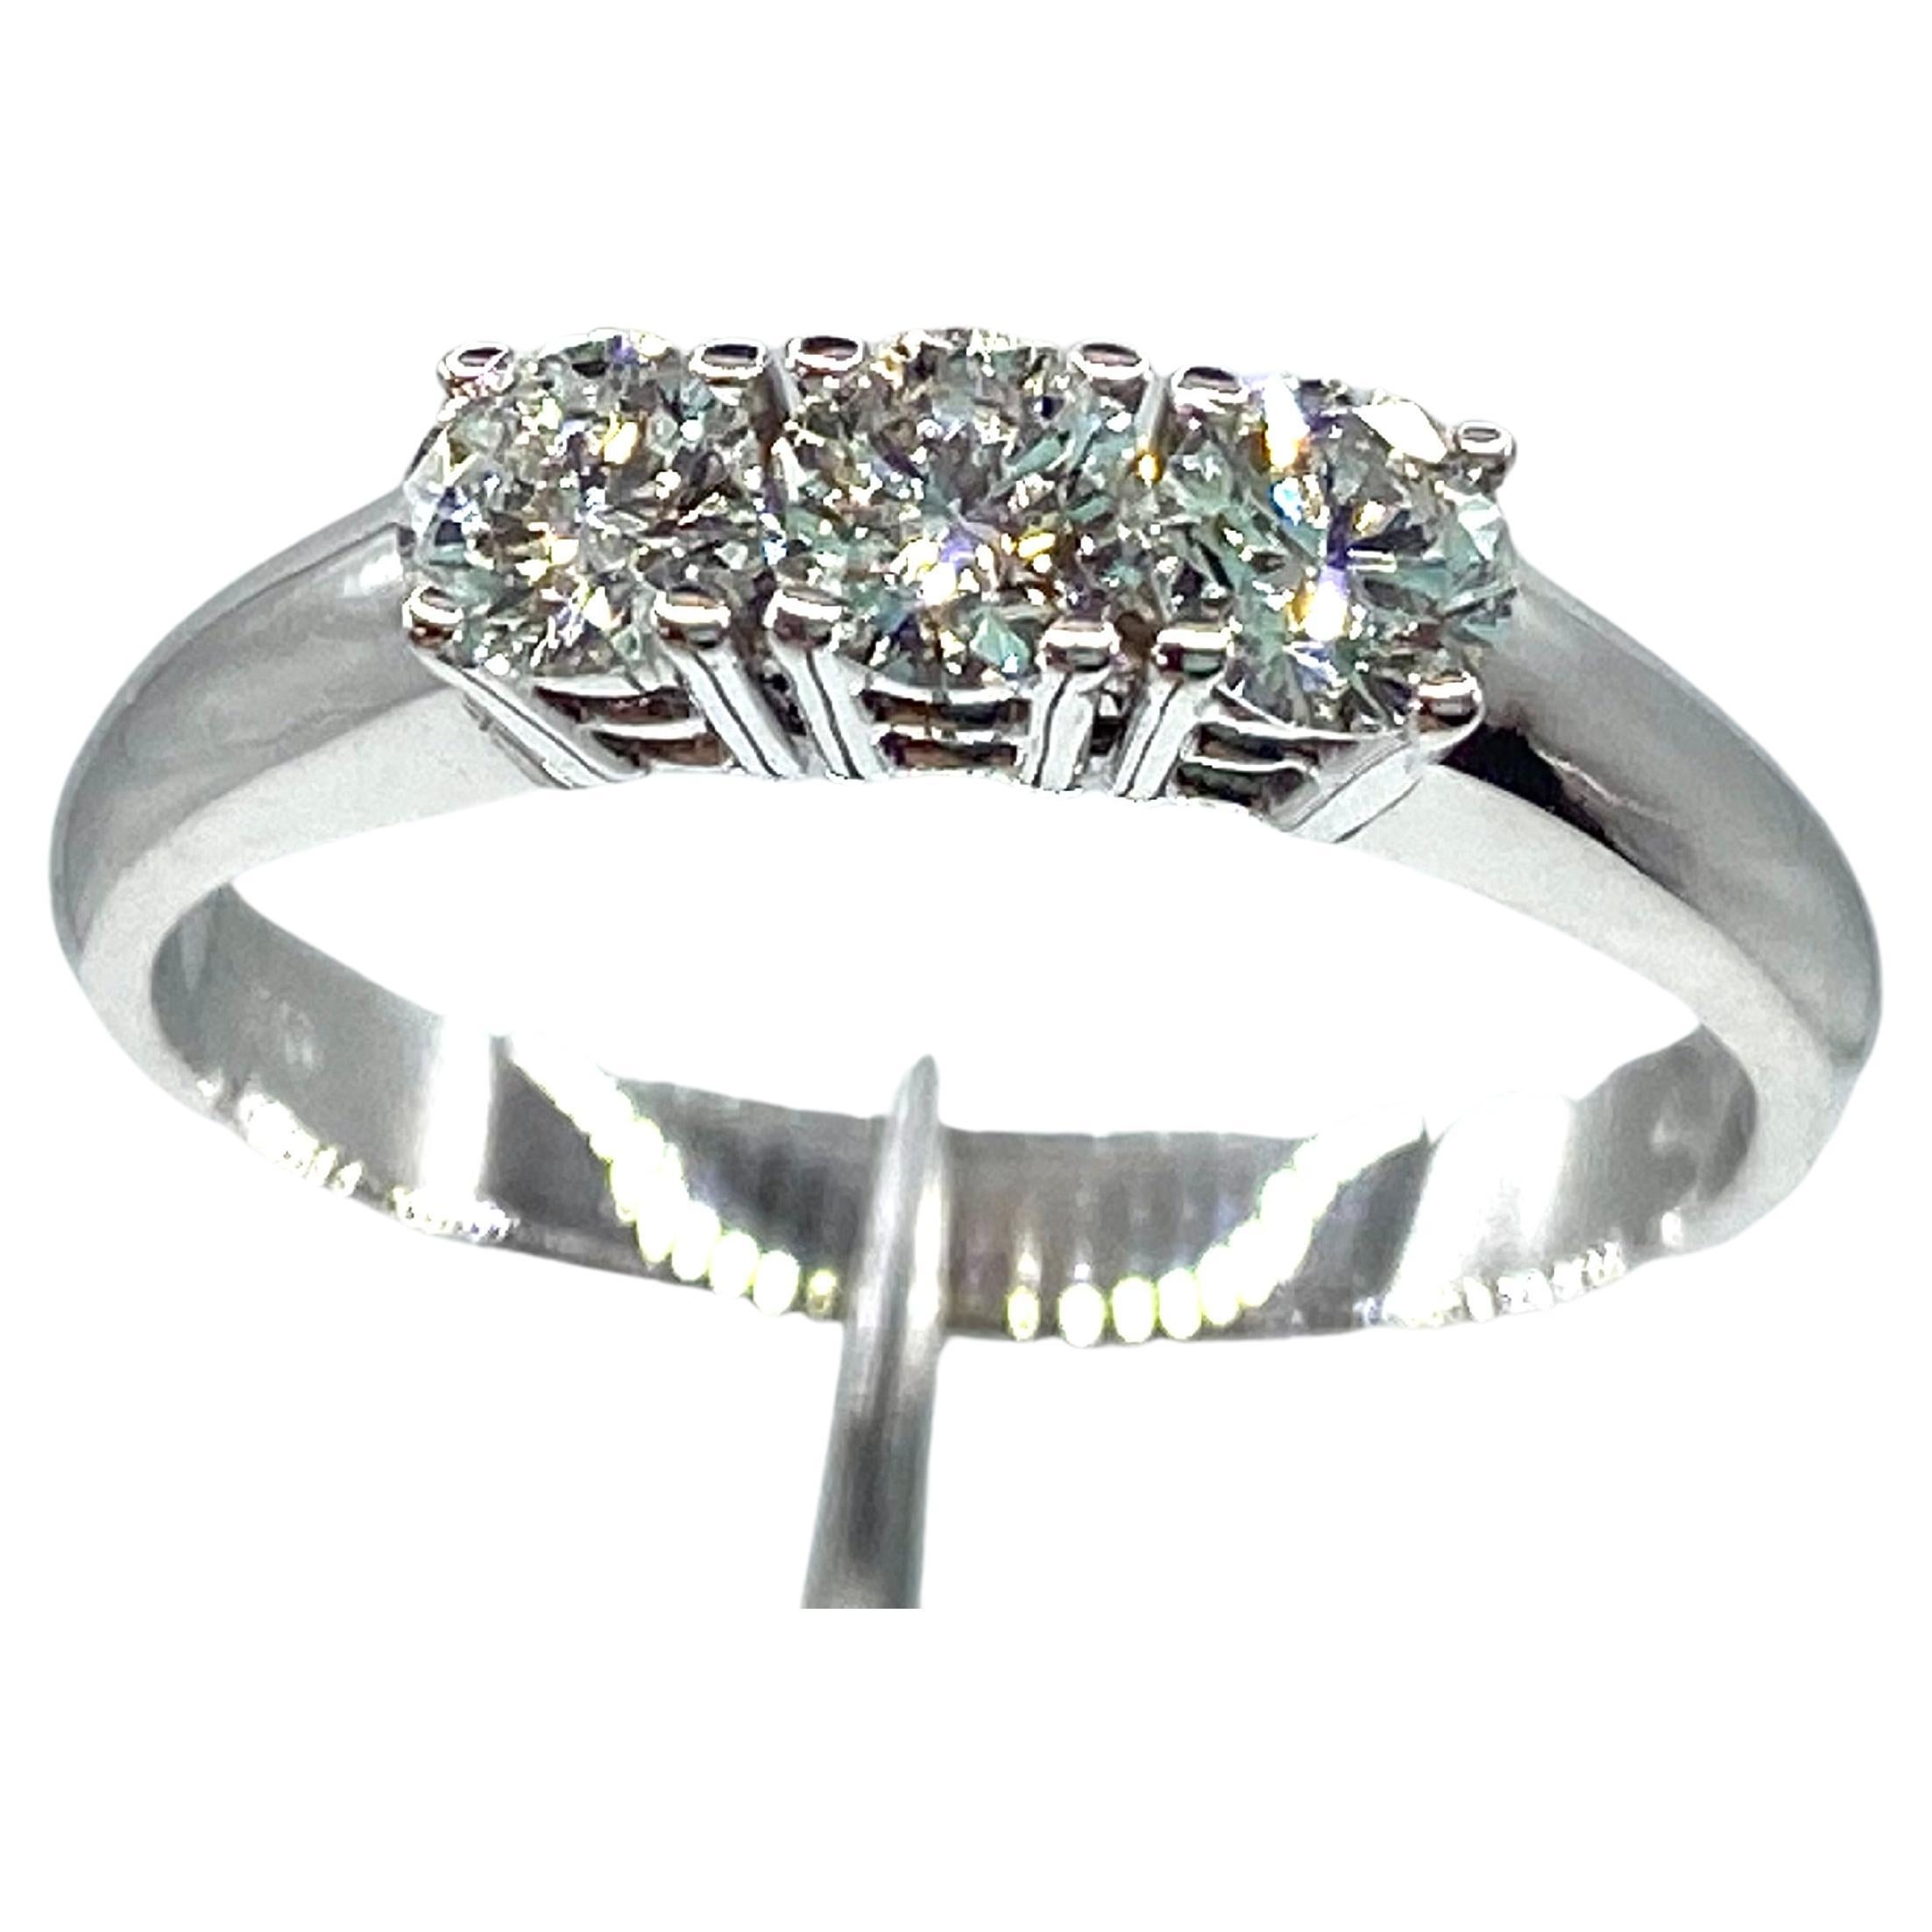 "Trilogy" Ring 18 Kt White Gold and Brilliant Cut Diamonds F Color For Sale